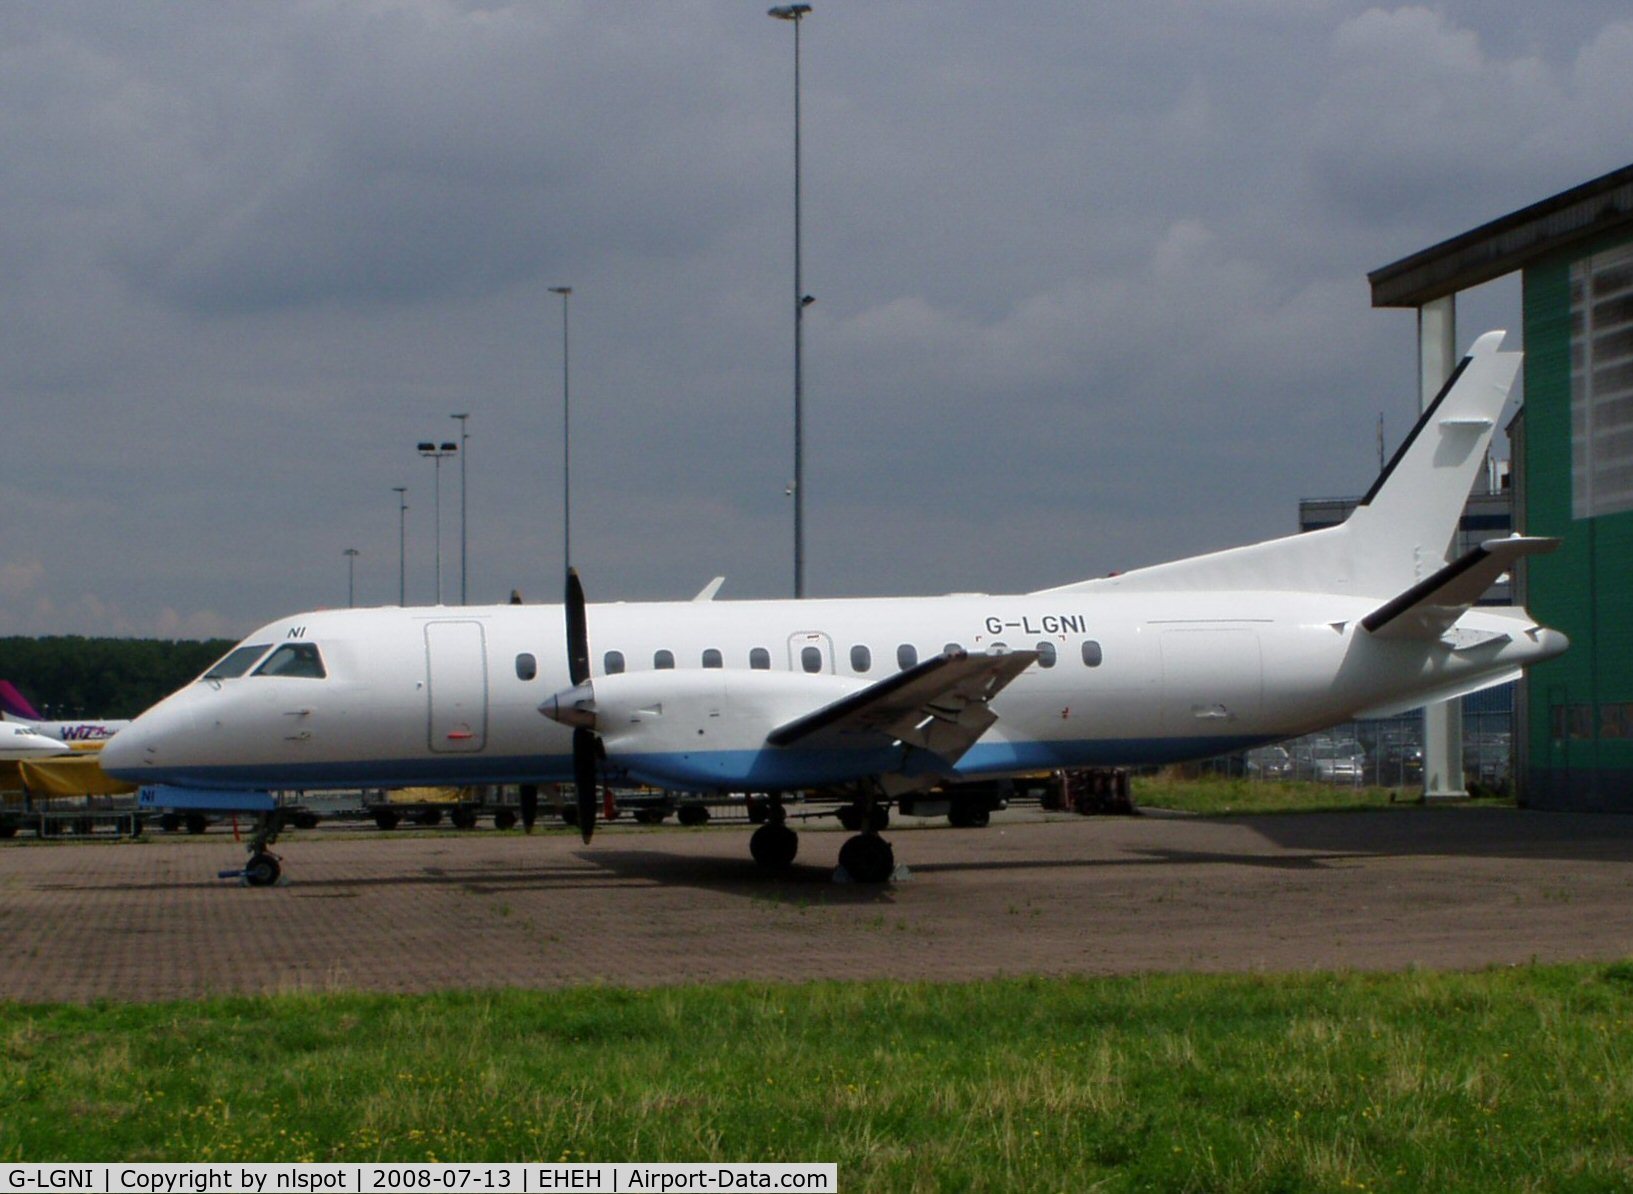 G-LGNI, 1989 Saab 340B C/N 340B-160, In basic FLY be colours, for painting.